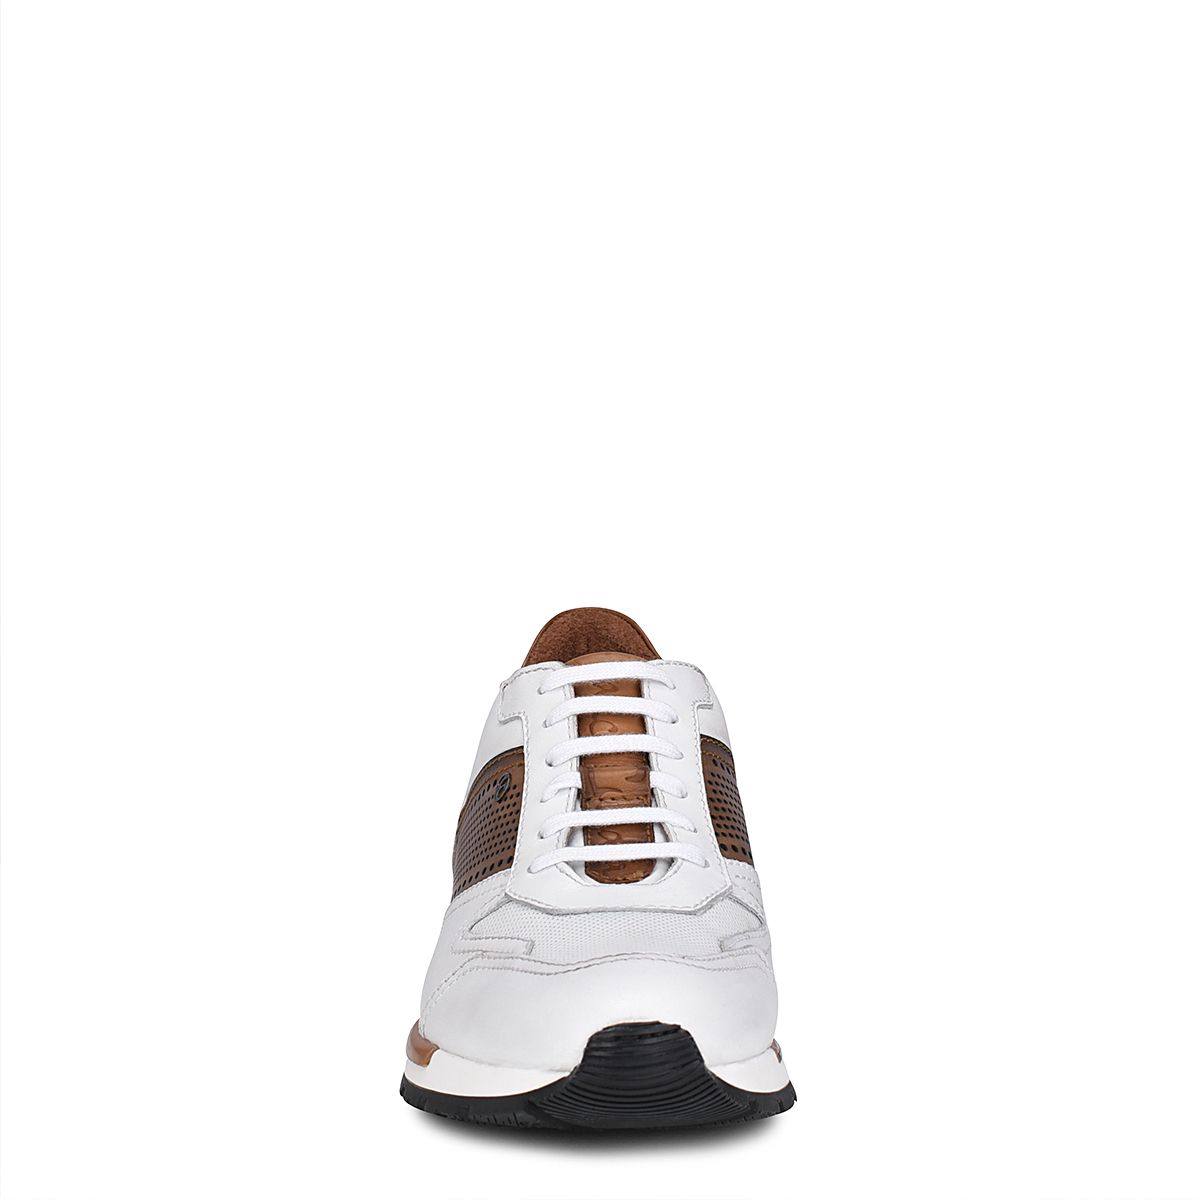 130KNTV - Cuadra white & brown casual fashion leather sneakers for men-Kuet.us